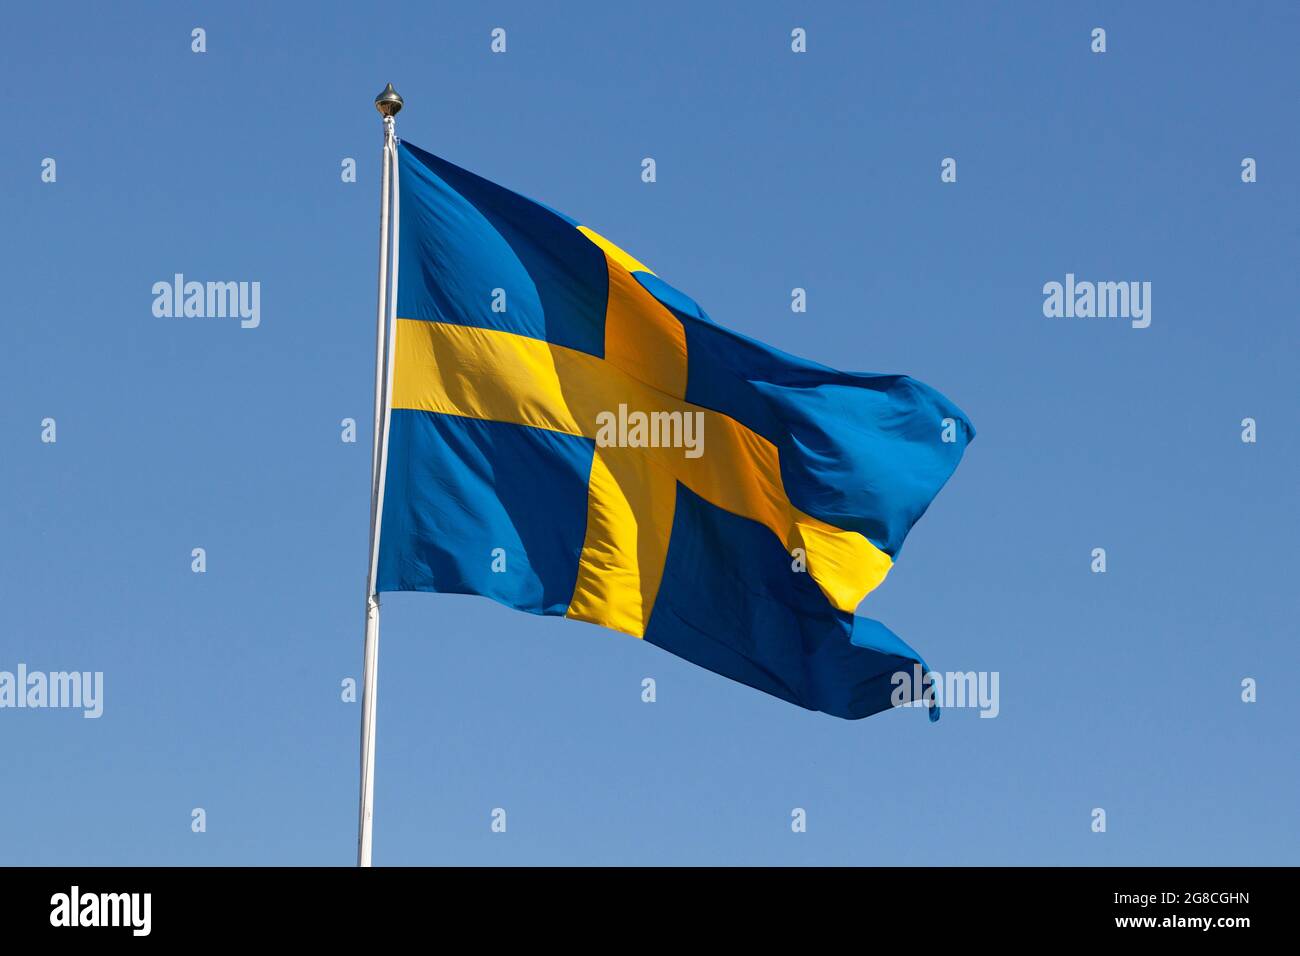 Stockholm, Sweden - May 29, 2021: A Swedish flag waving in the wind as a national symbol of Sweden during a flag day. Stock Photo